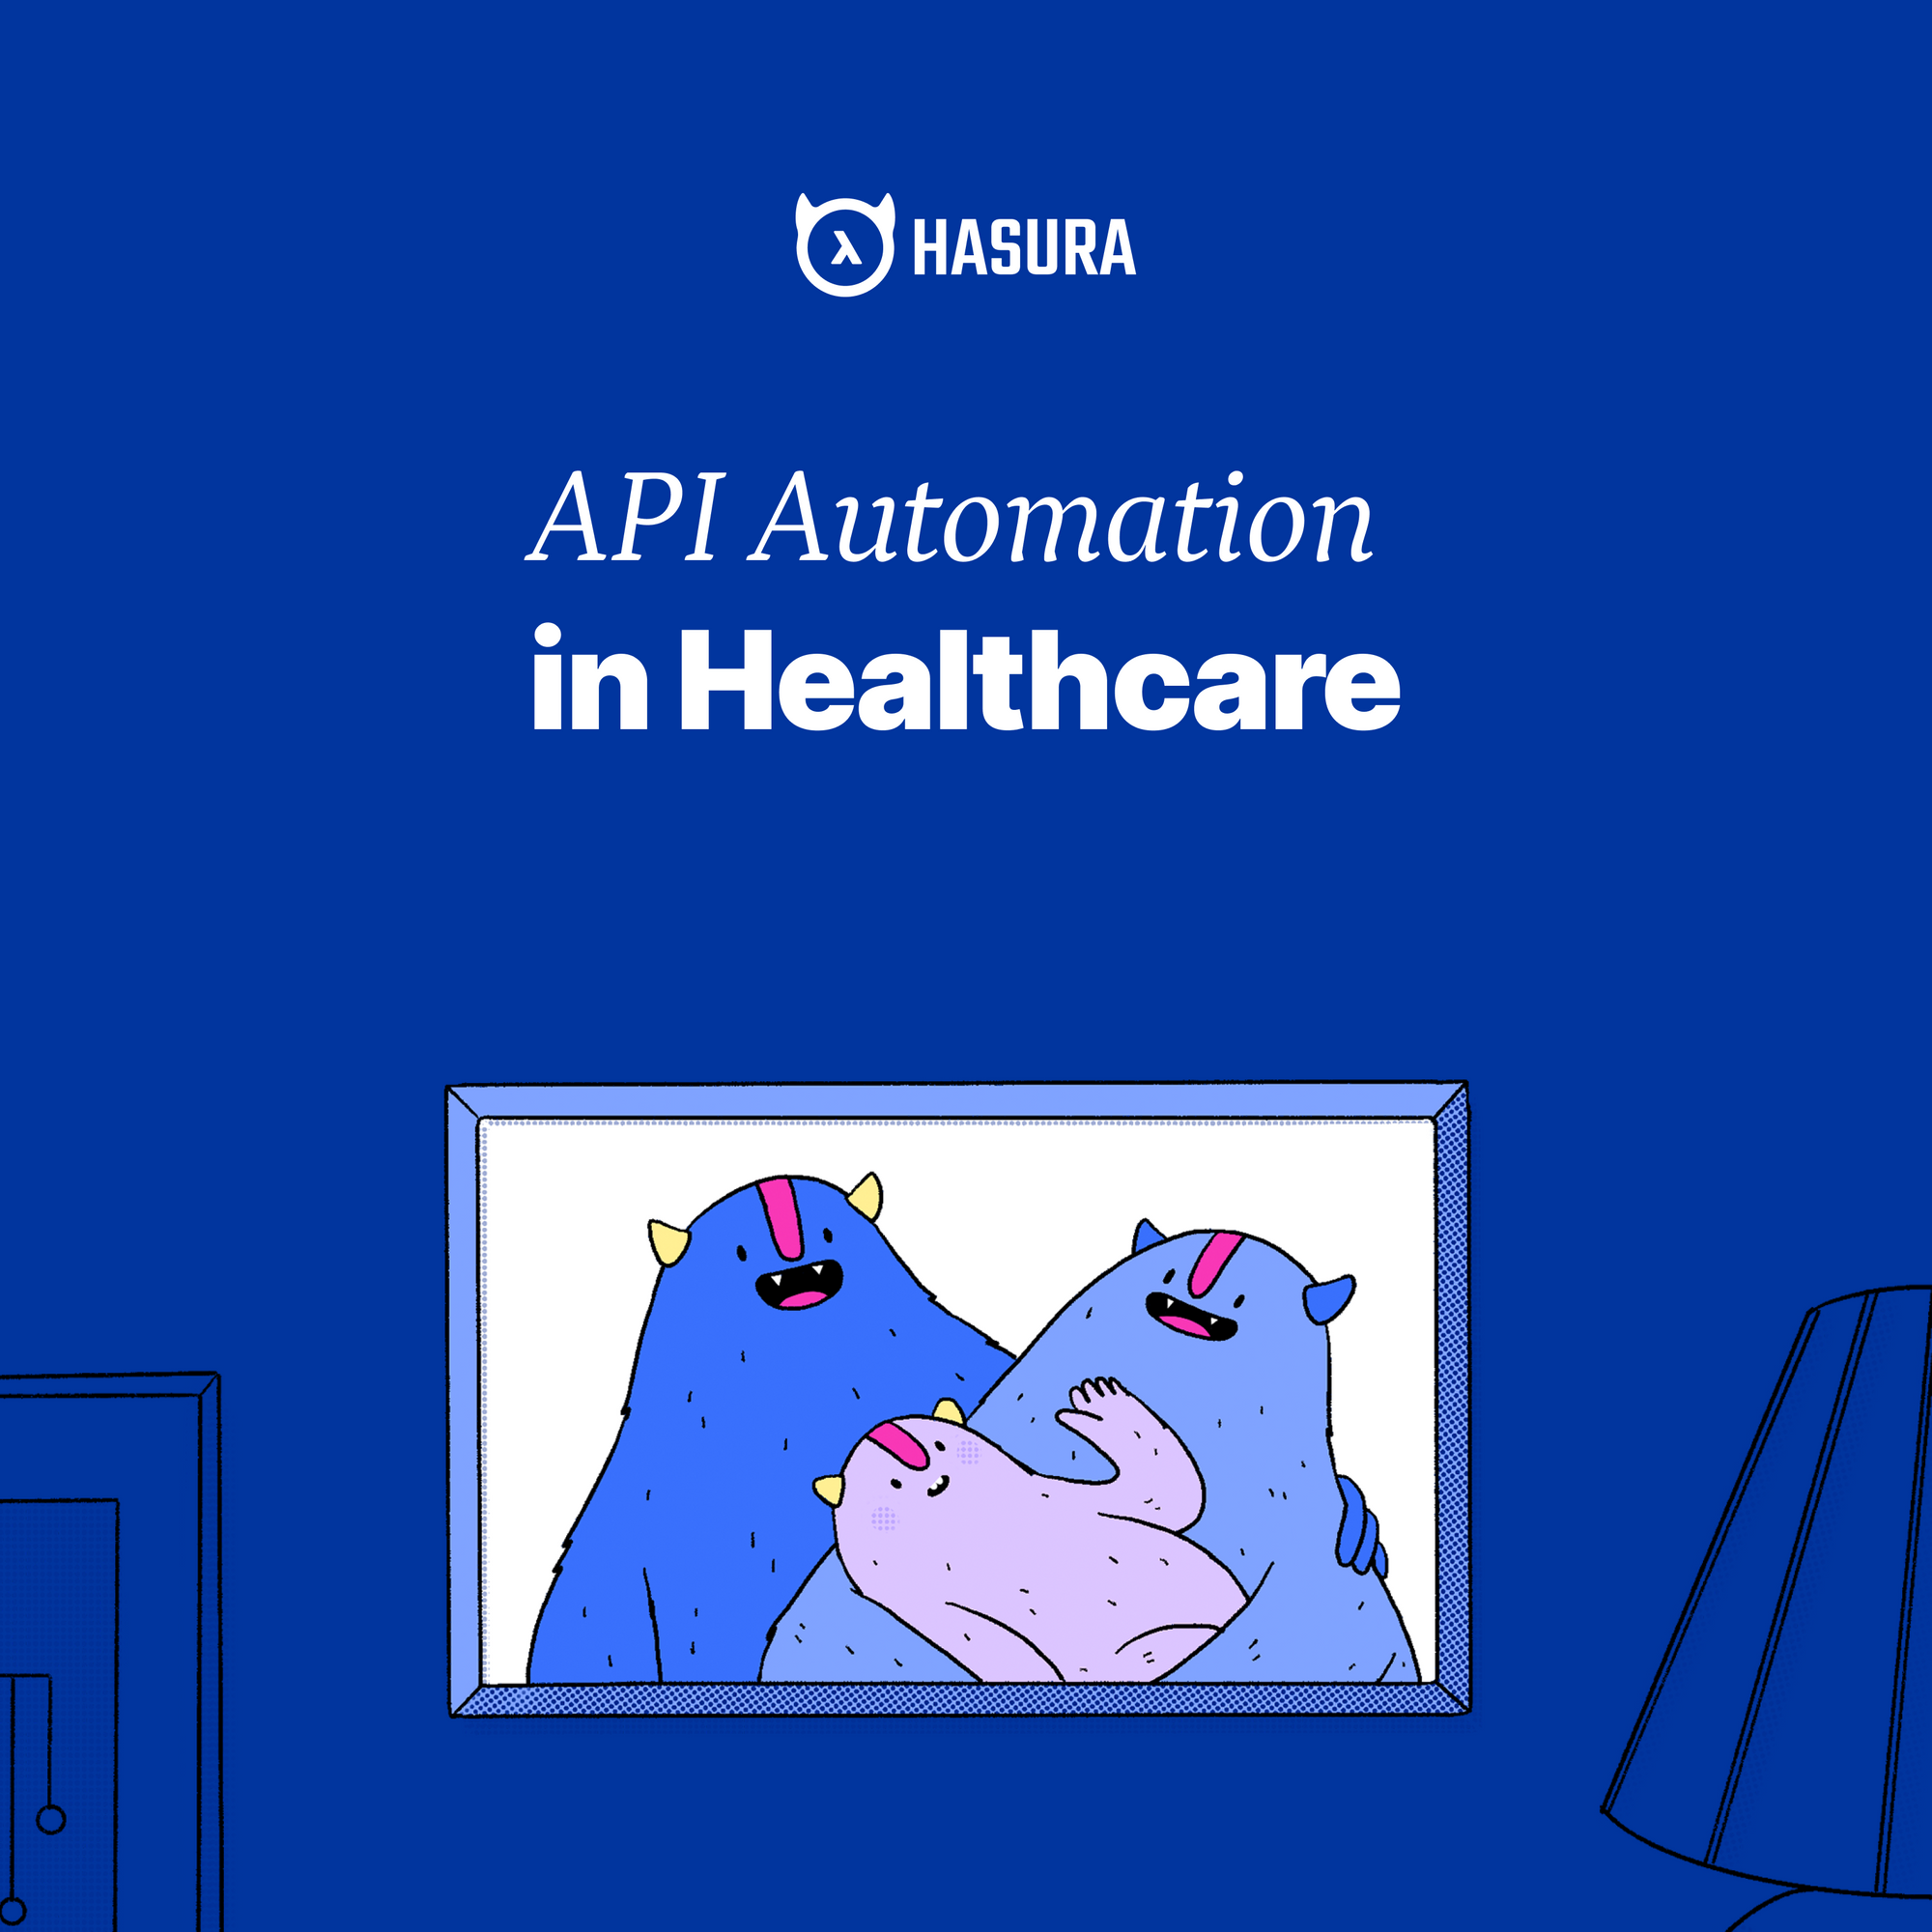 API Automation in Healthcare with Hasura